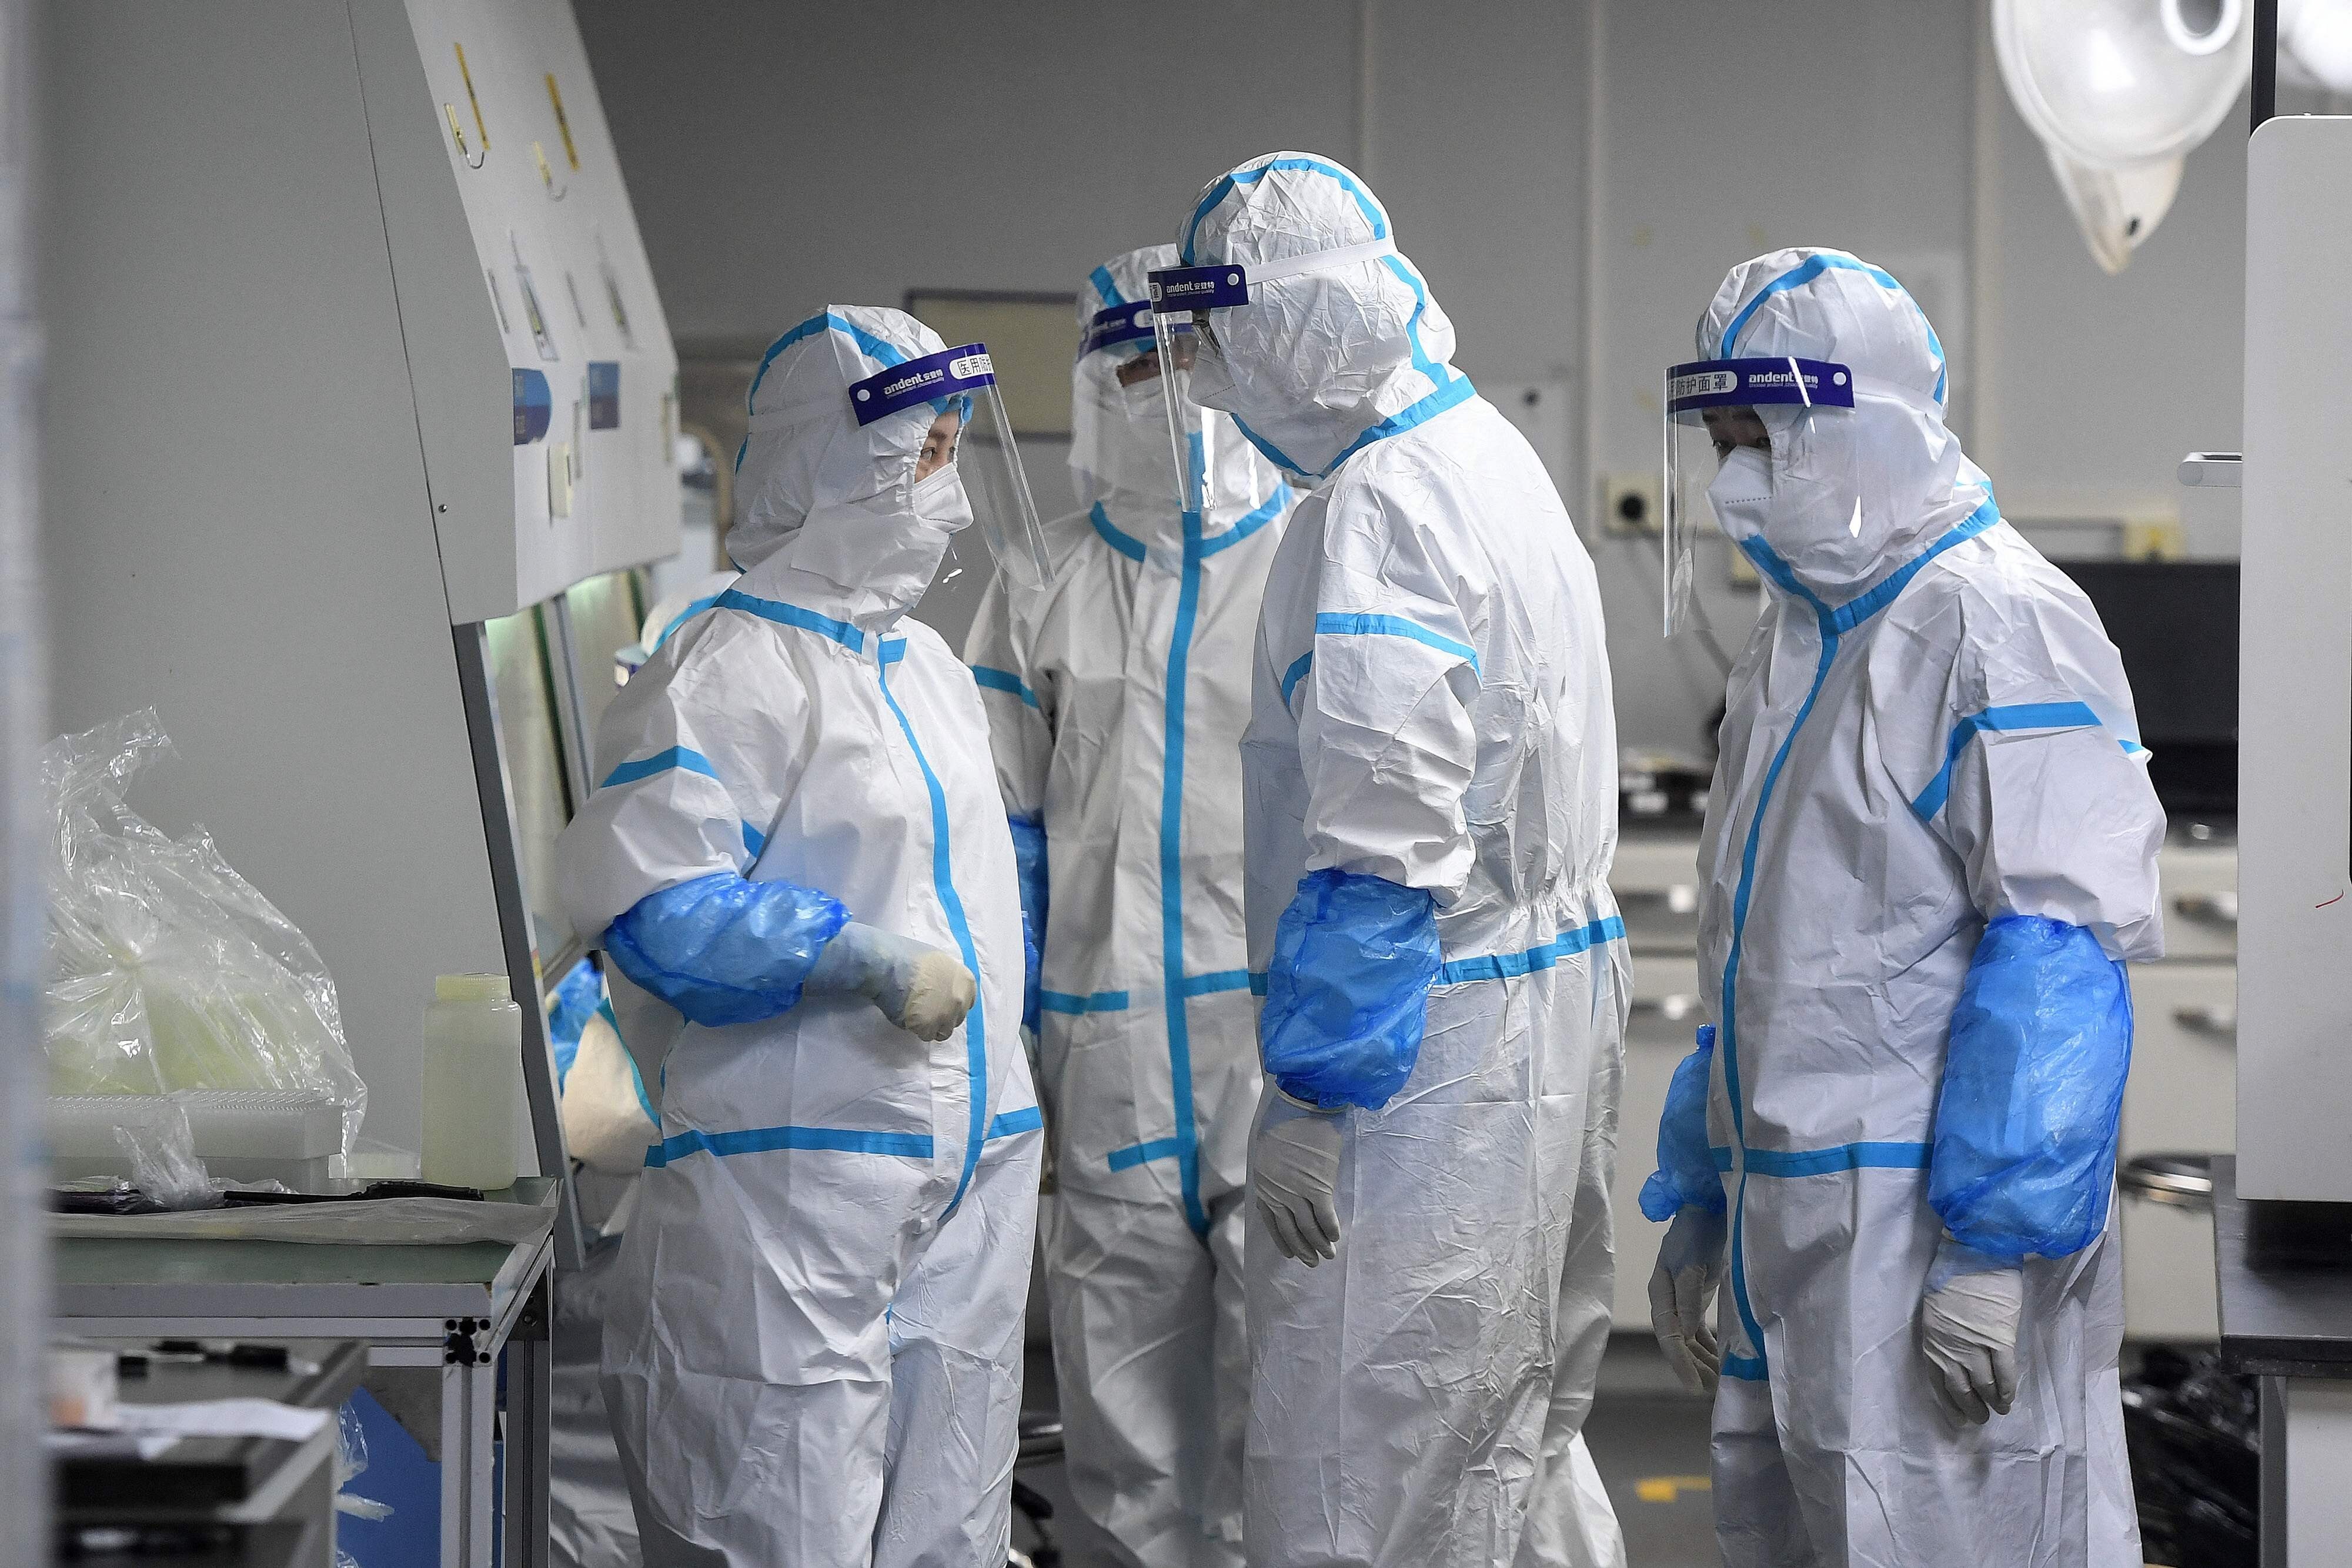 Laboratory technicians wearing personal protective equipment handle samples to be tested for Covid-19 in Wuhan, China, following an outbreak of the Delta variant in the city. Photo: AFP